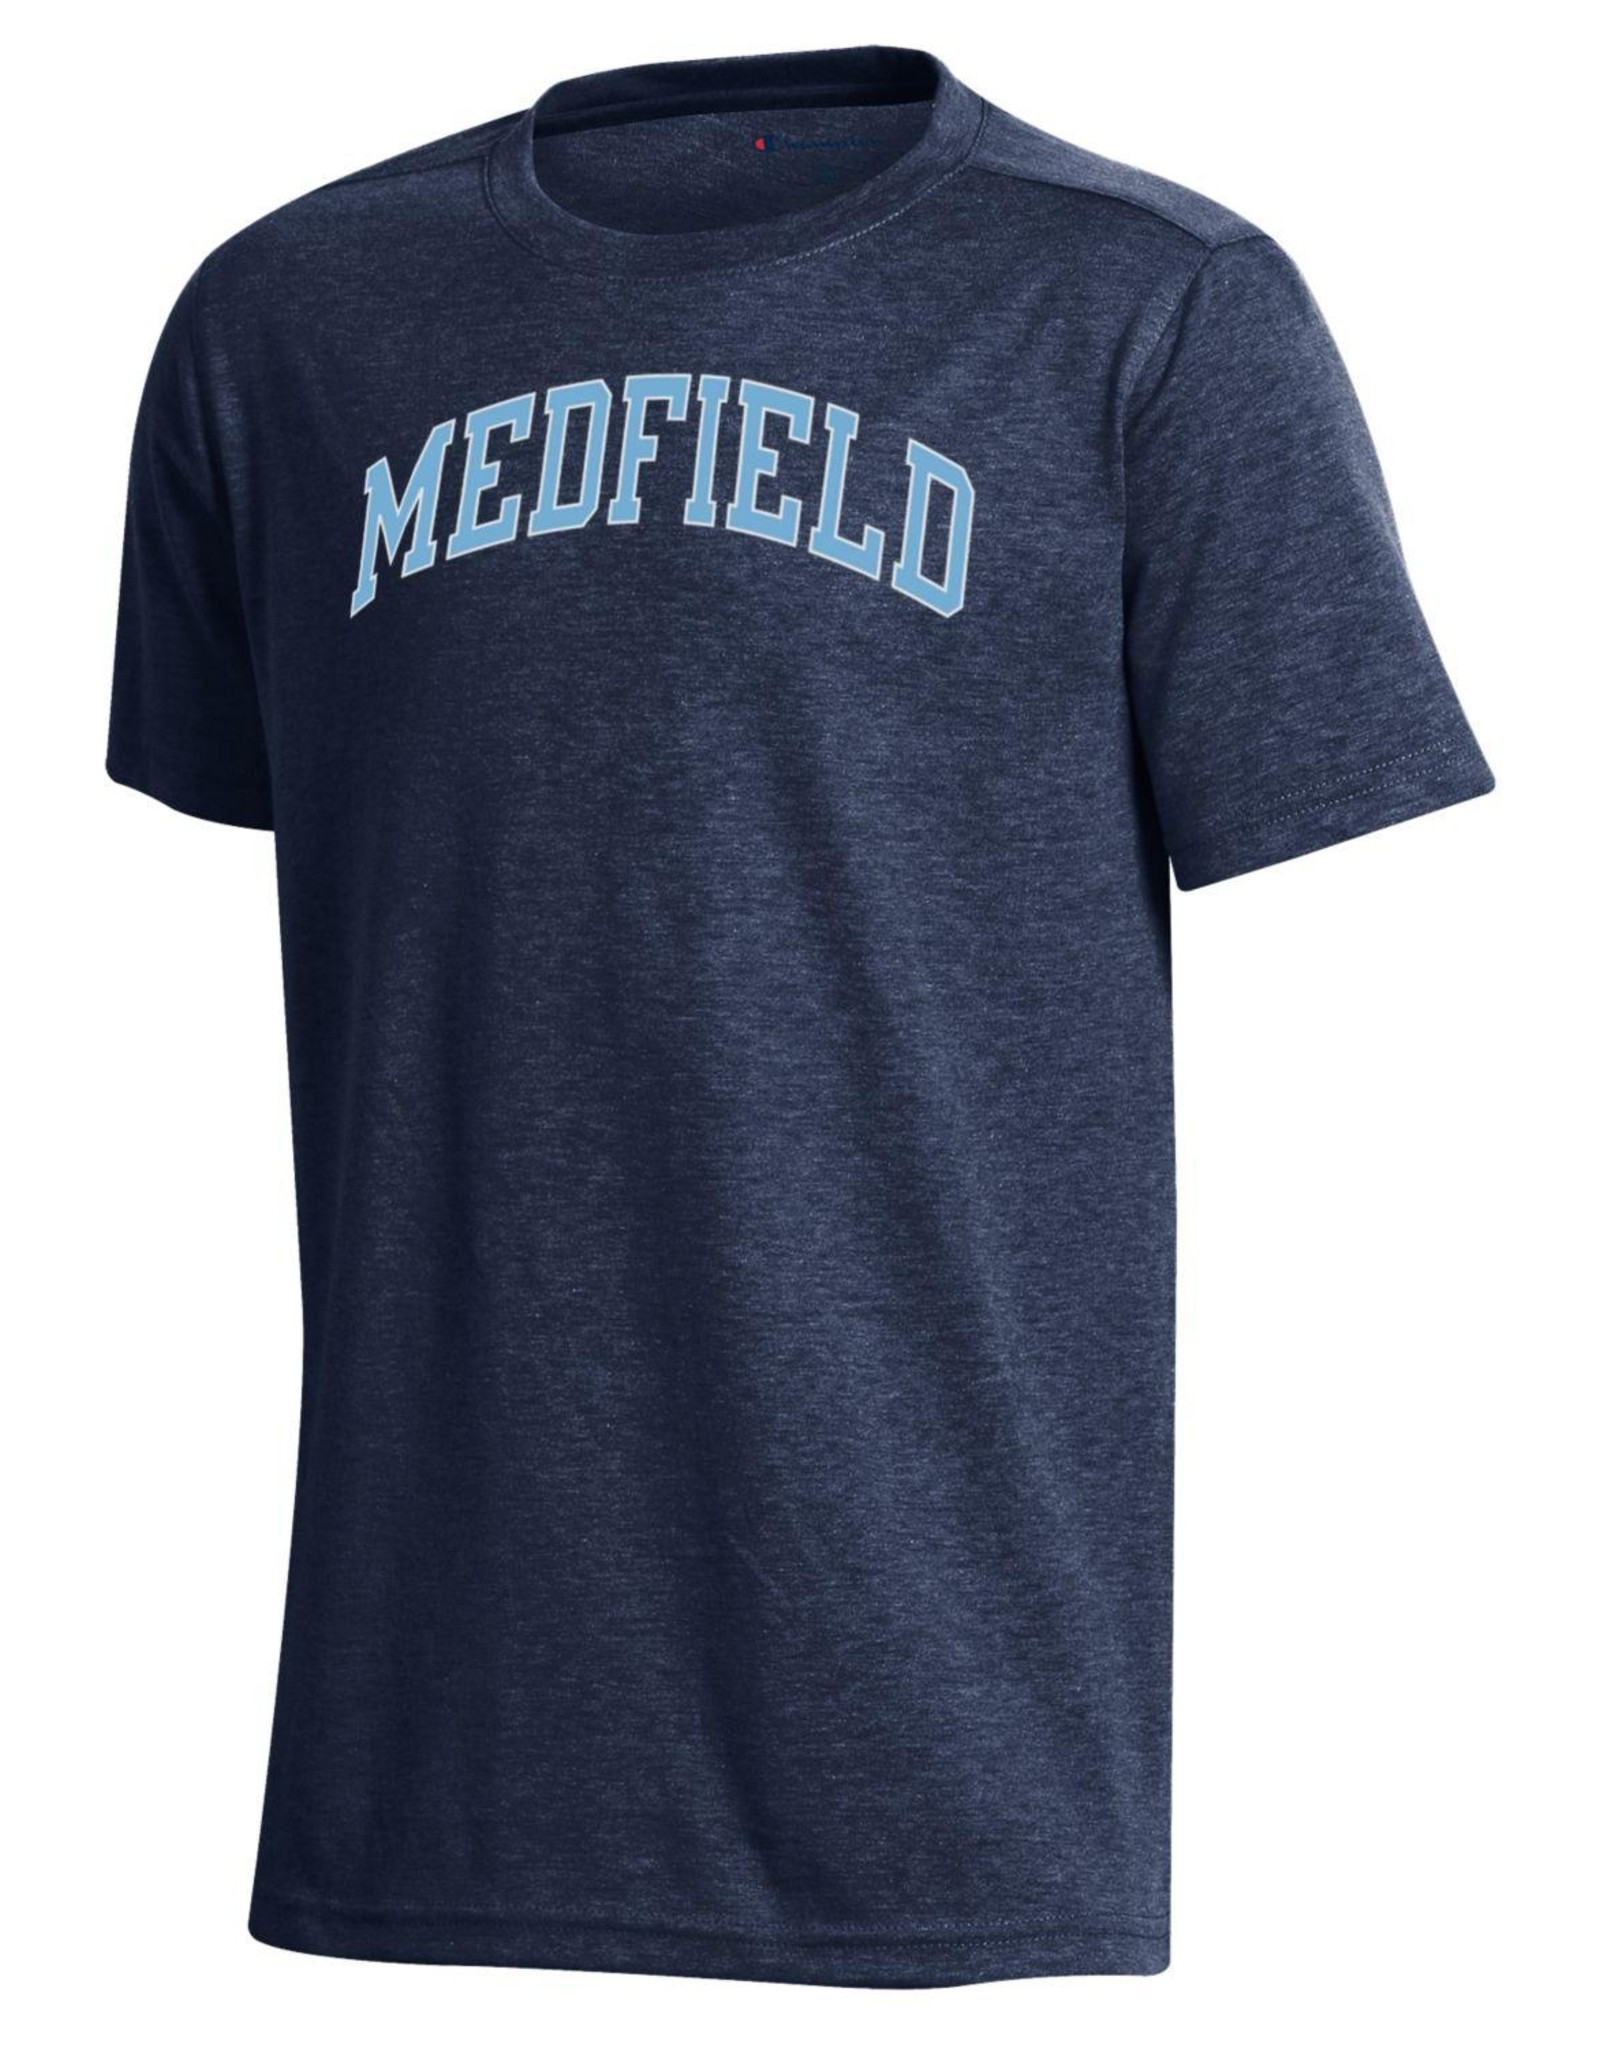 Champion - Youth Medfield Field Day Tee